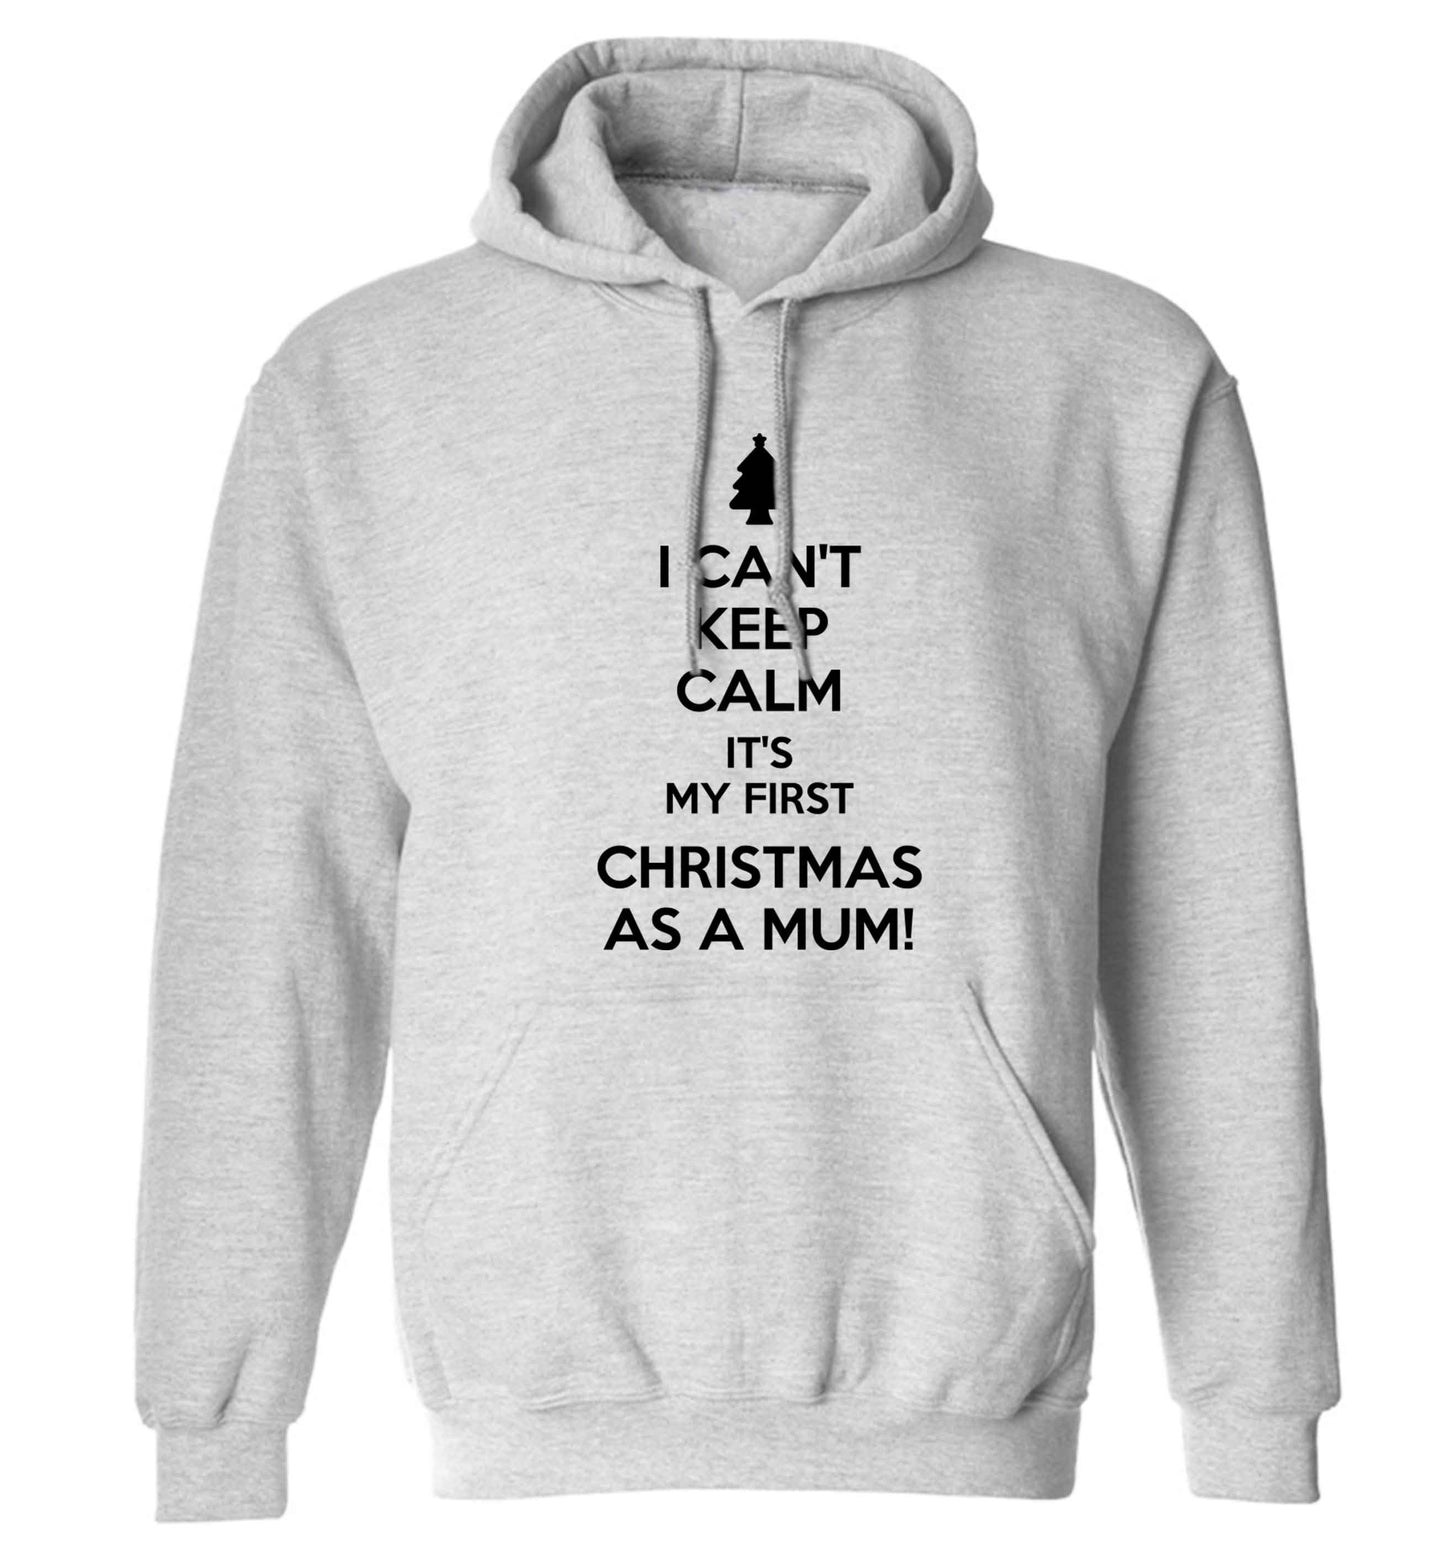 I can't keep calm it's my first Christmas as a mum adults unisex grey hoodie 2XL